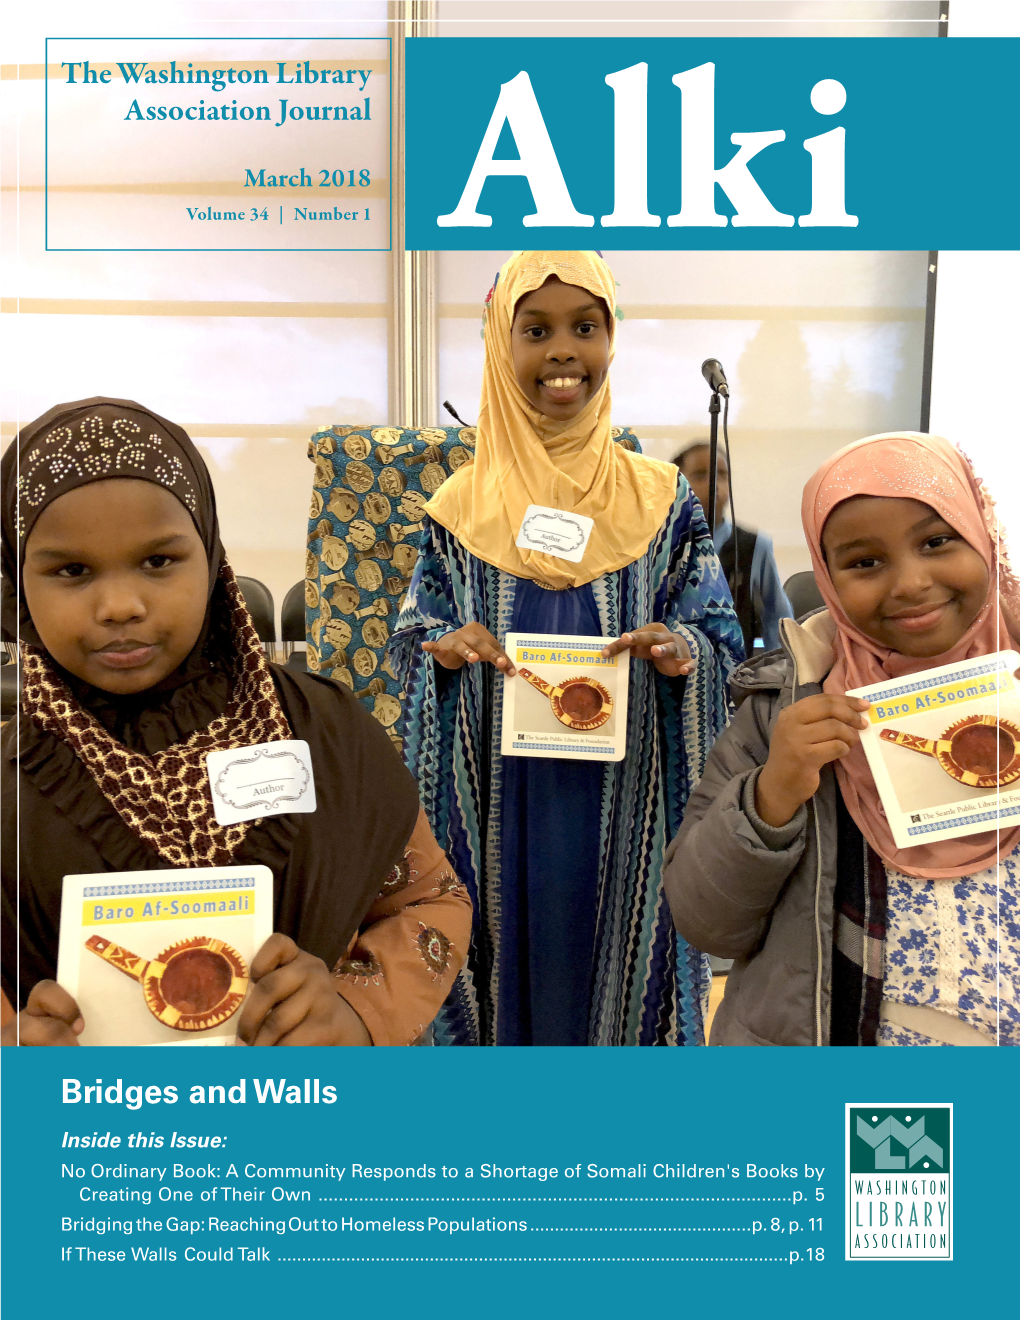 Bridges and Walls Inside This Issue: No Ordinary Book: a Community Responds to a Shortage of Somali Children's Books by Creating One of Their Own